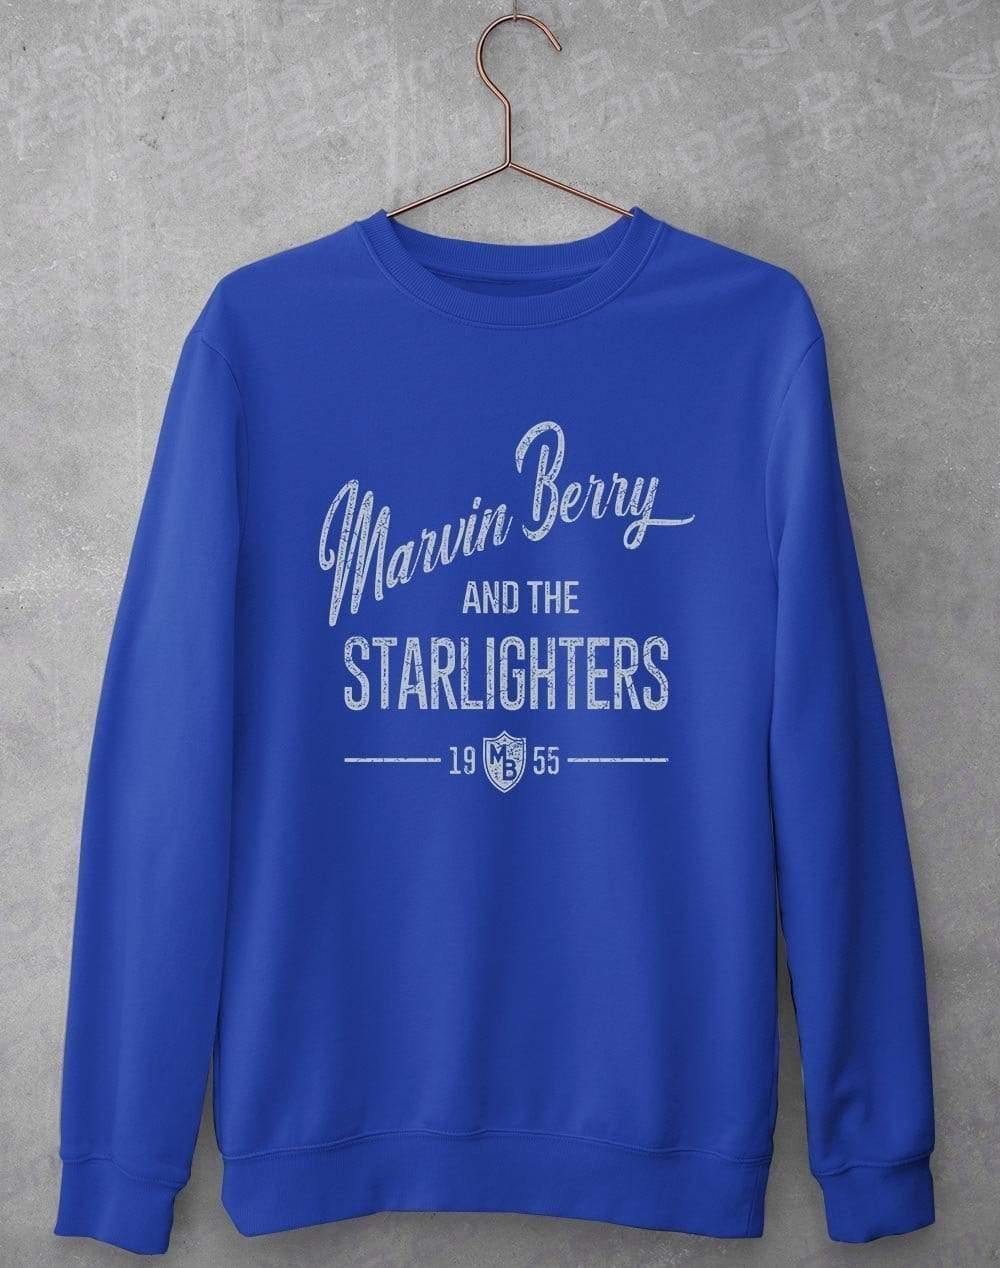 Marvin Berry and the Starlighters Sweatshirt S / Royal  - Off World Tees